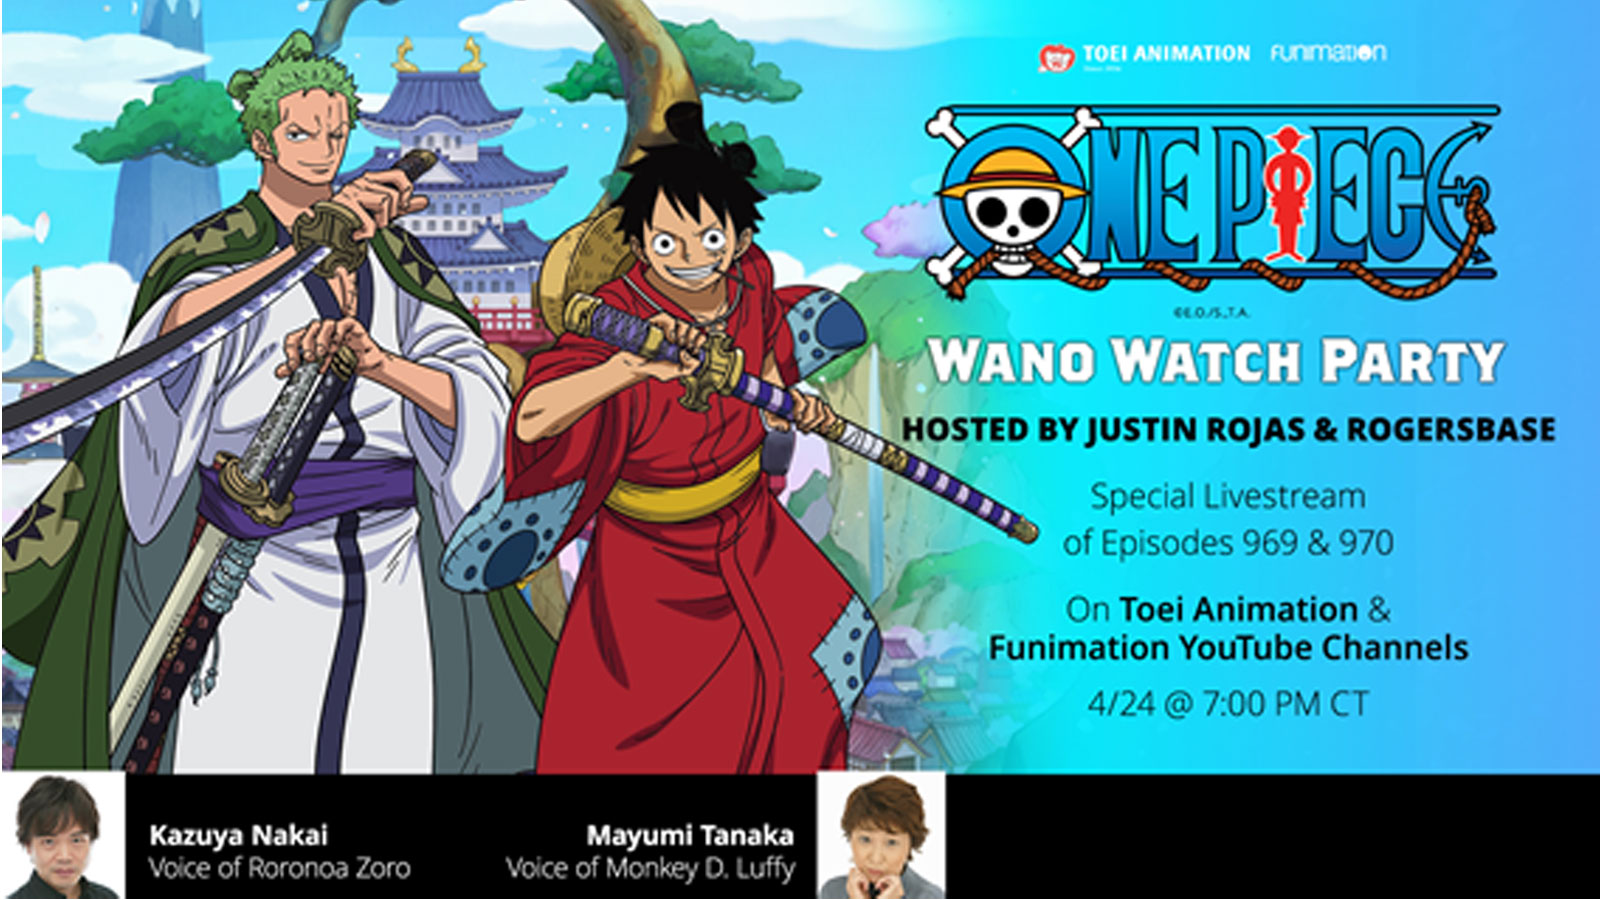 TOEI ANIMATION AND FUNIMATION PRESENT “ONE PIECE WANO WATCH PARTY” GLOBAL SIMULCAST FAN EVENT COMING APRIL 24!